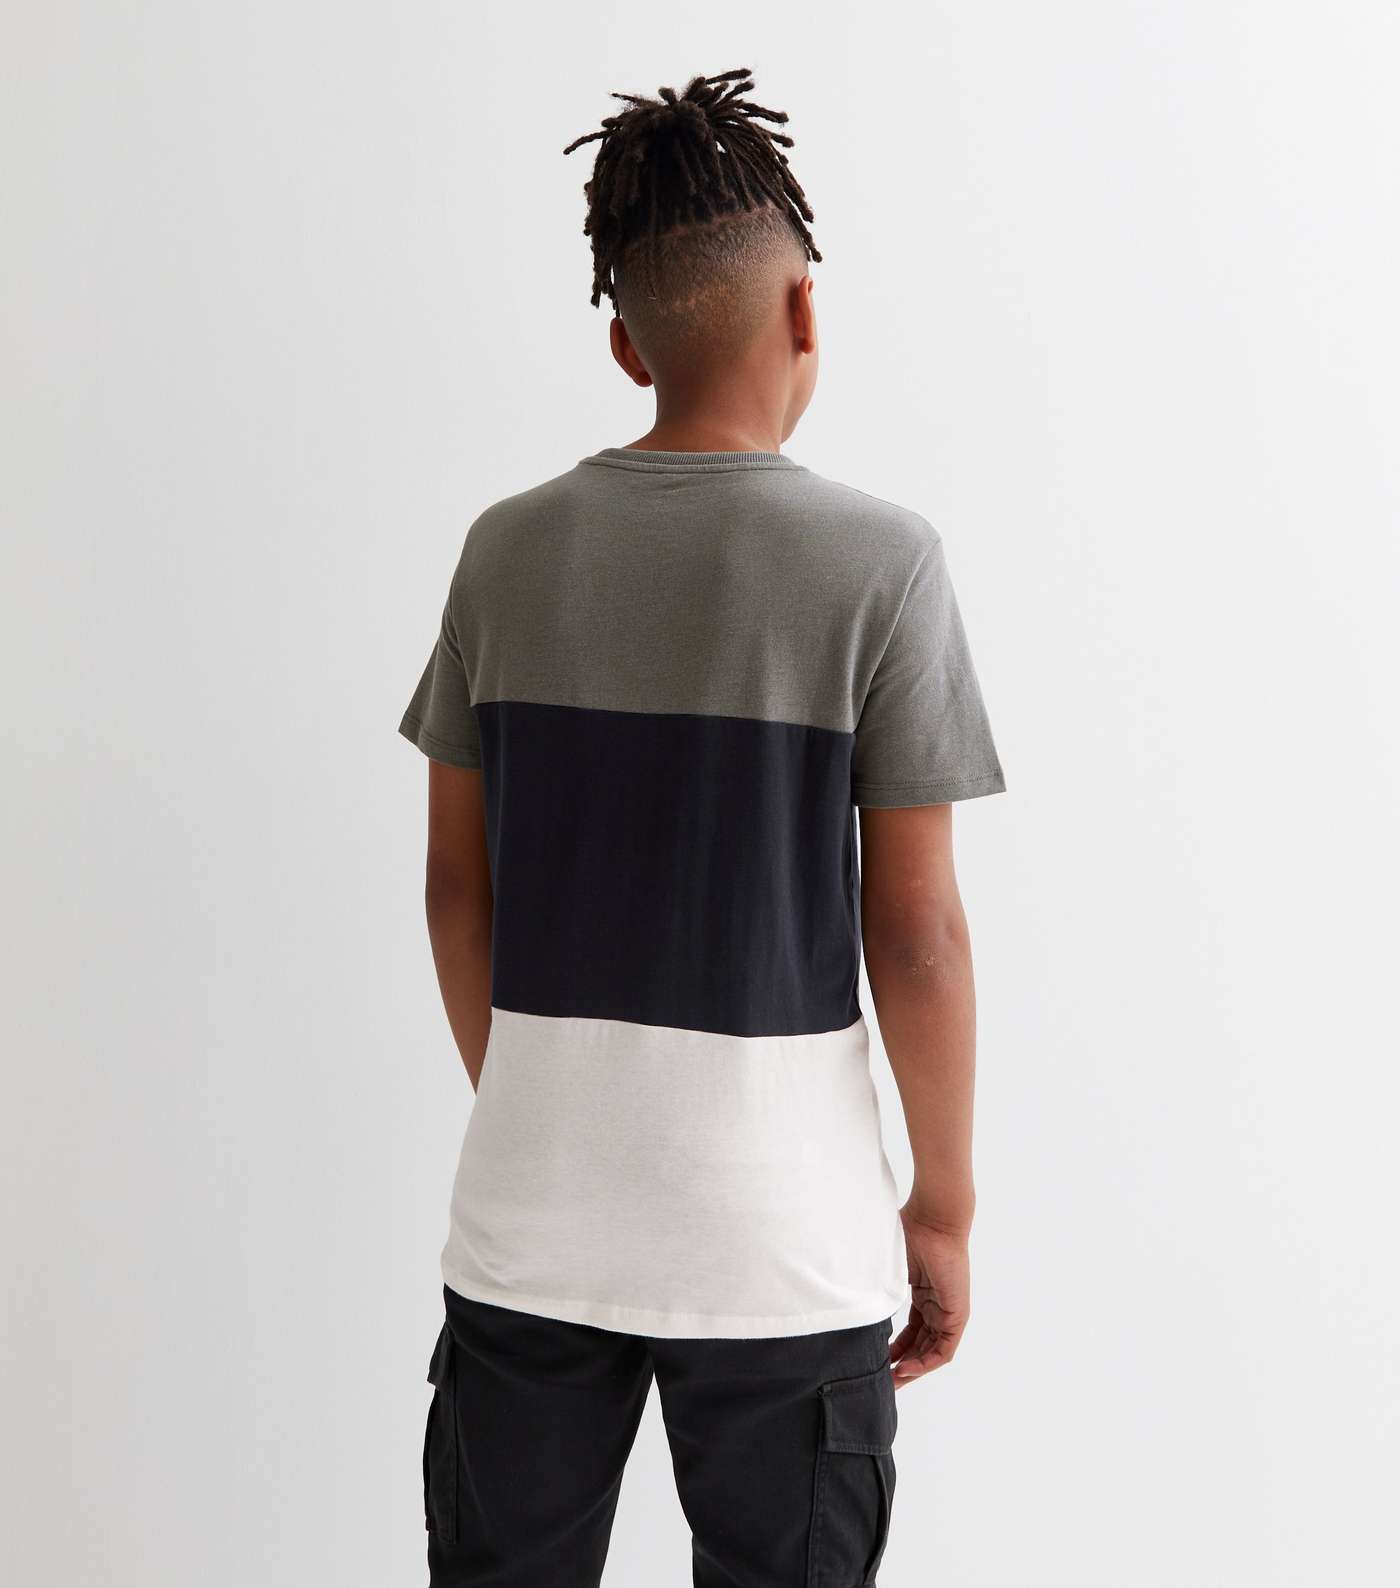 KIDS ONLY Grey Marl Colour Block Crew T-Shirt Image 4